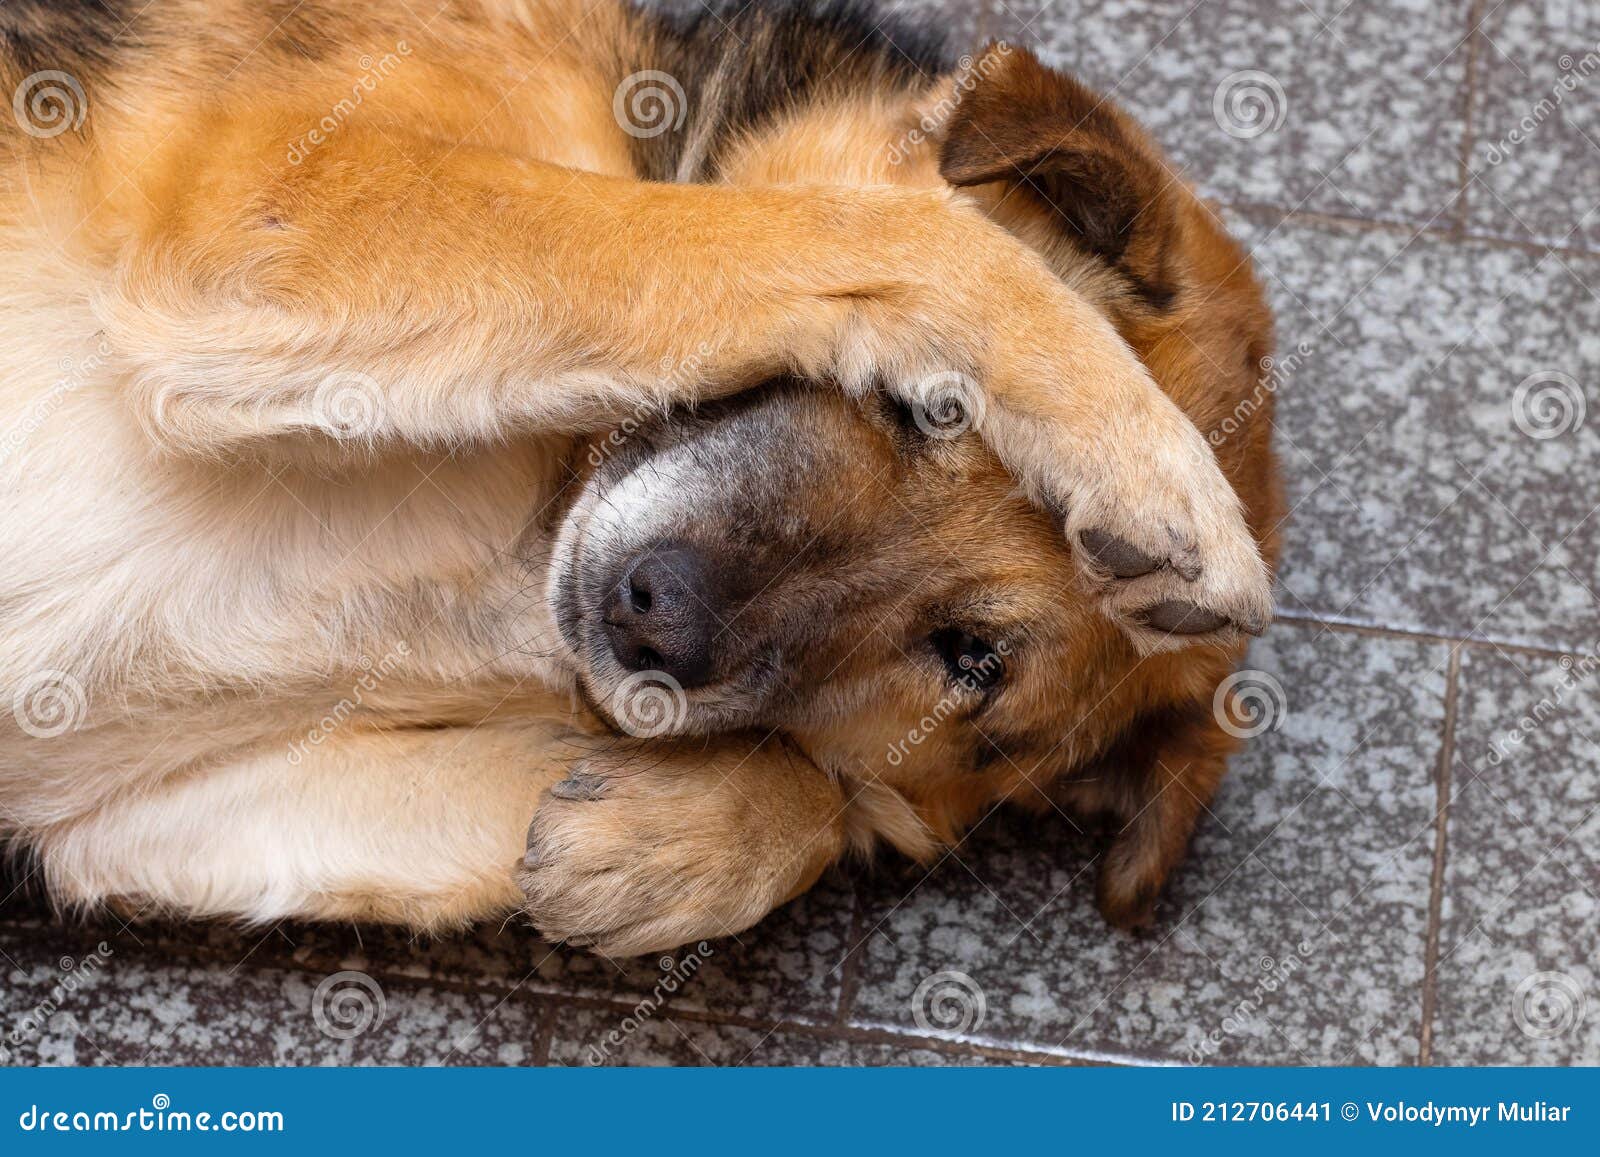 a brown dog lies in a room on the floor and closes his eyes with his paws. the concept of shame